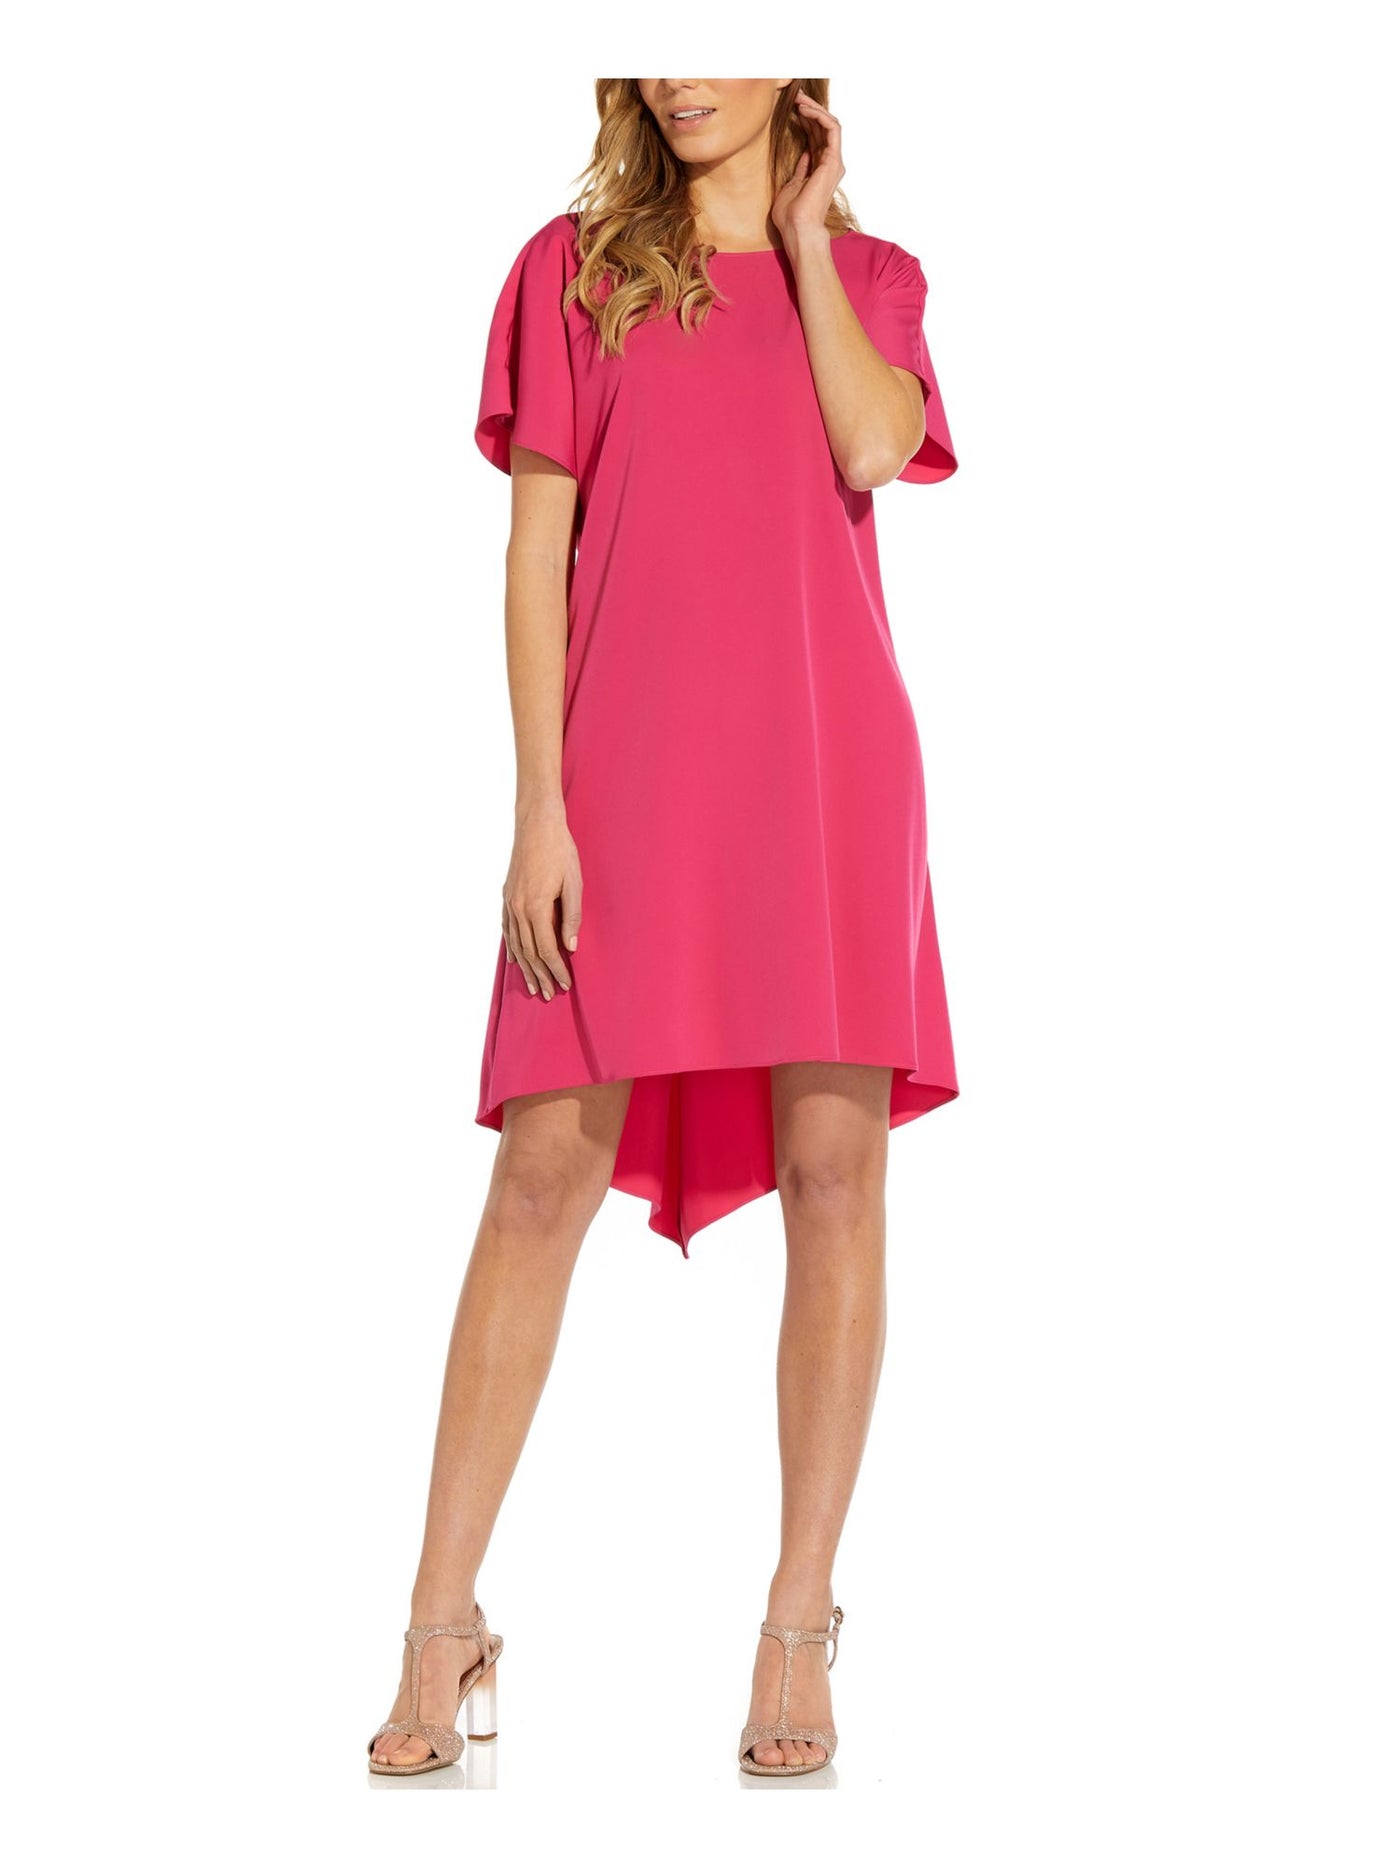 ADRIANNA PAPELL Womens Pink Short Sleeve Boat Neck Below The Knee Evening Hi-Lo Dress 6